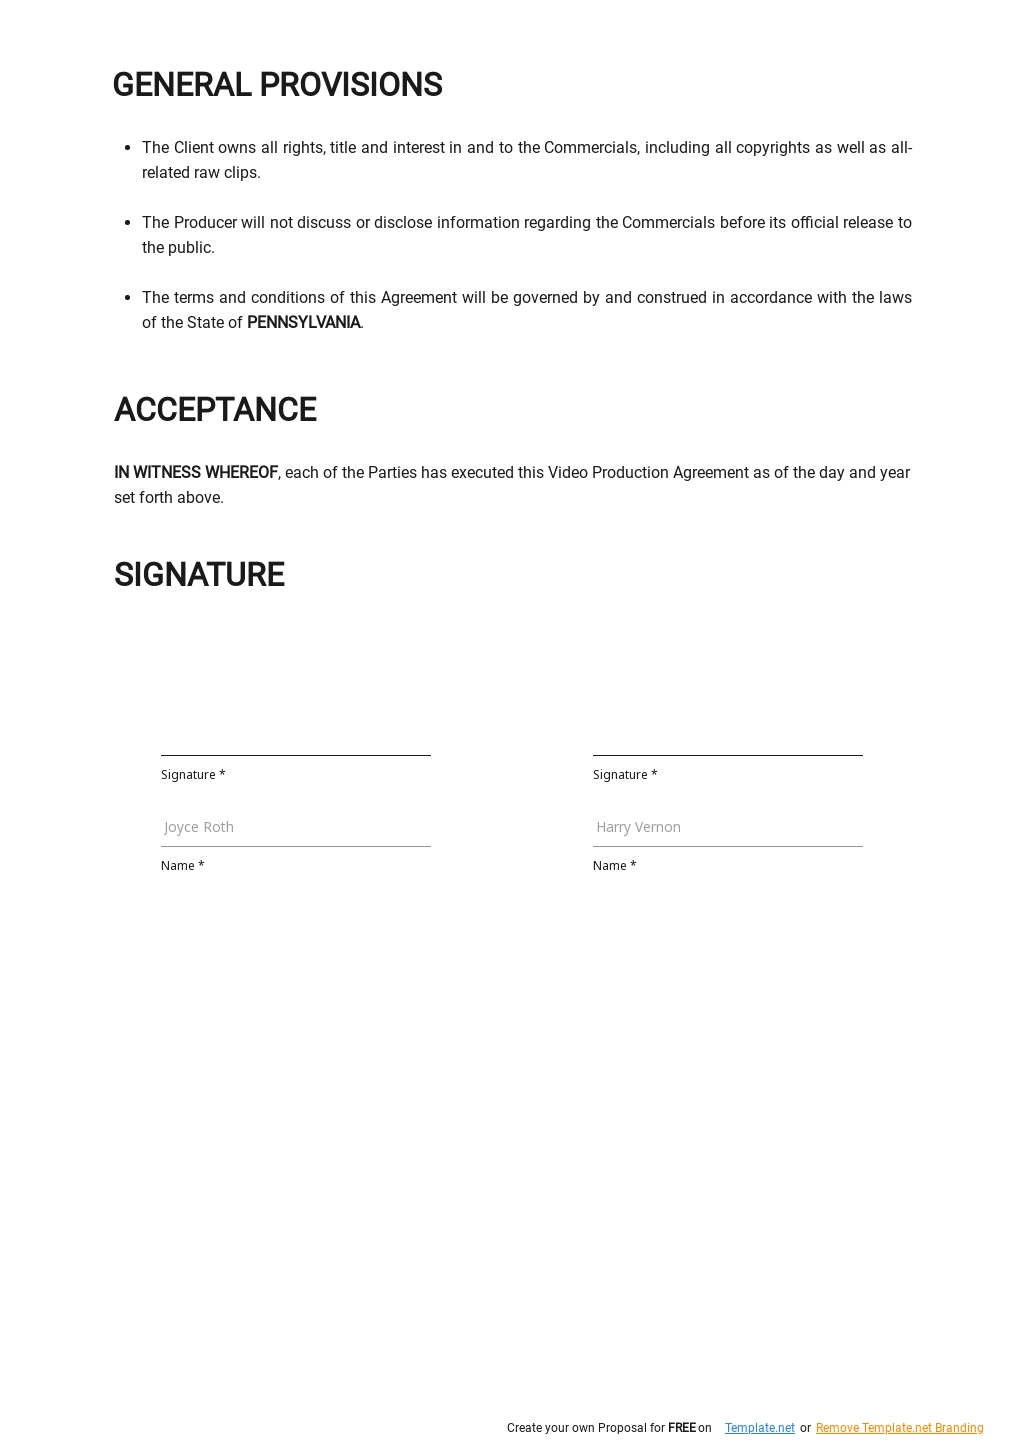 Video Production Agreement Template 2.jpe